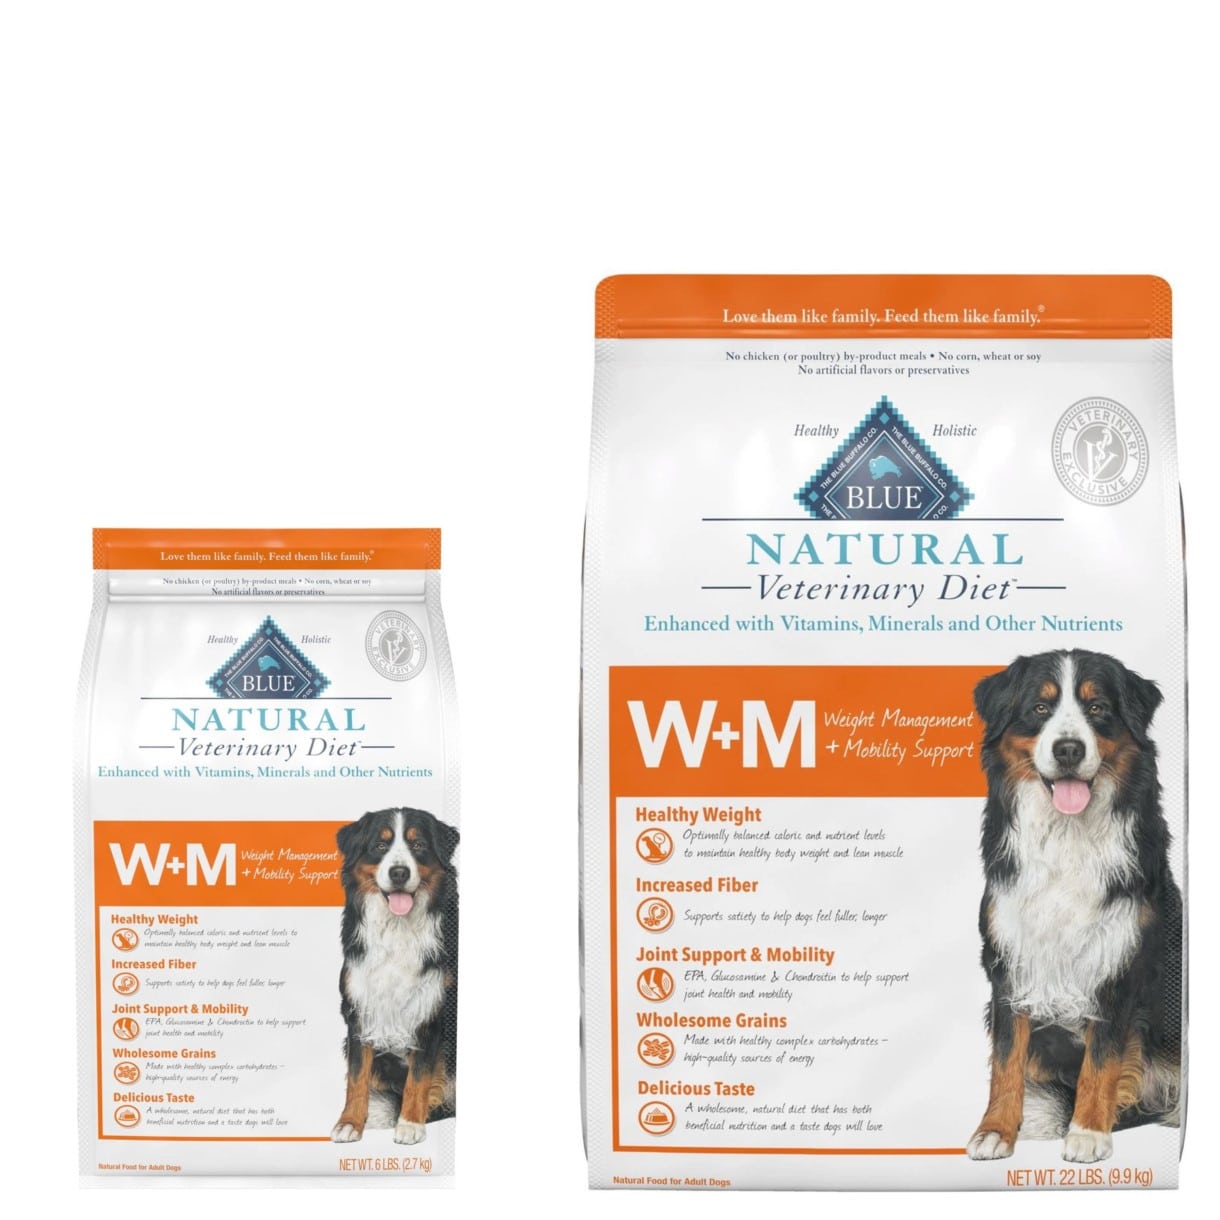 Blue Buffalo Natural Veterinary Diet W+M Weight Management + Mobility Support Dry Dog Food